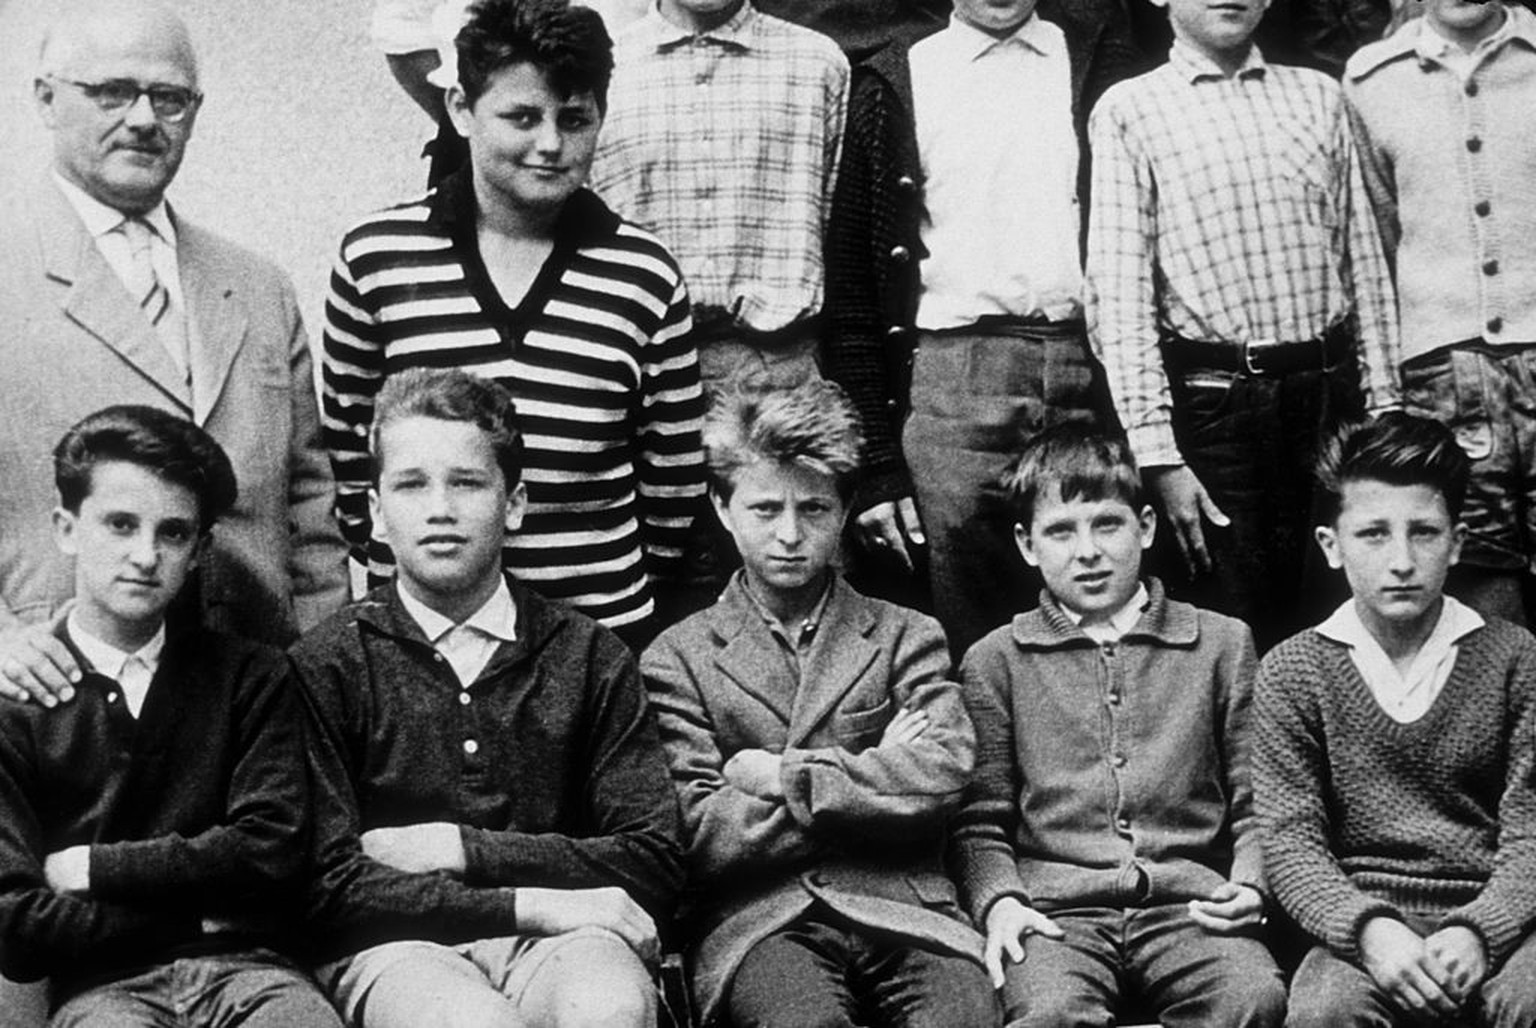 THAL, AUSTRIA - 1958: Eleven year old Arnold Schwarzenegger (bottom row, second from left) poses for a photo with his classmates in 1958 in Thal, Austria. (Photo by Michael Ochs Archives/Getty Images)